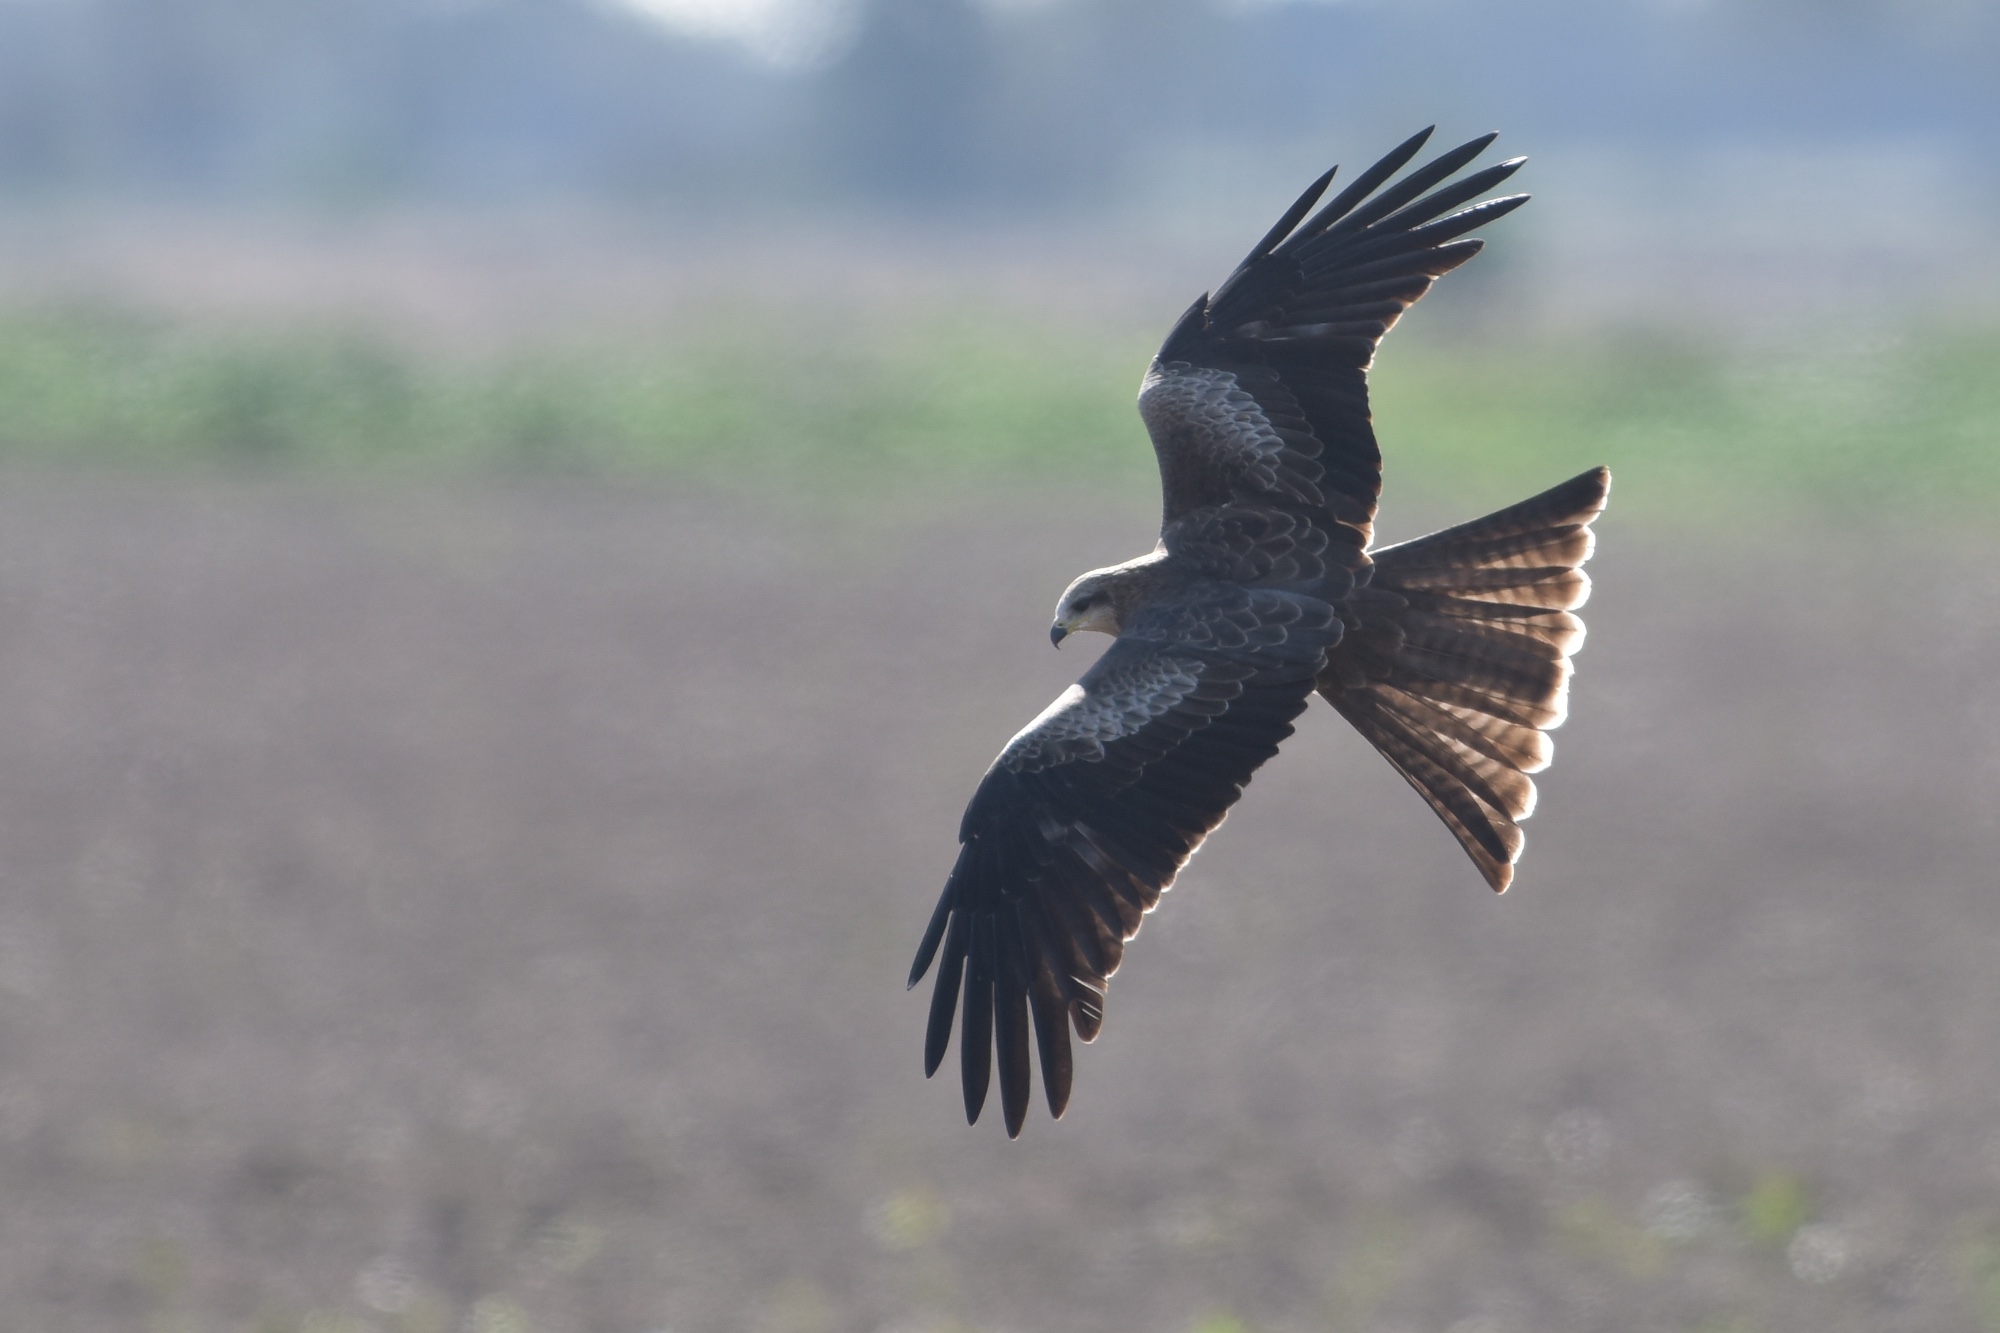 A Black Kite on a tight turn hunting small insects.